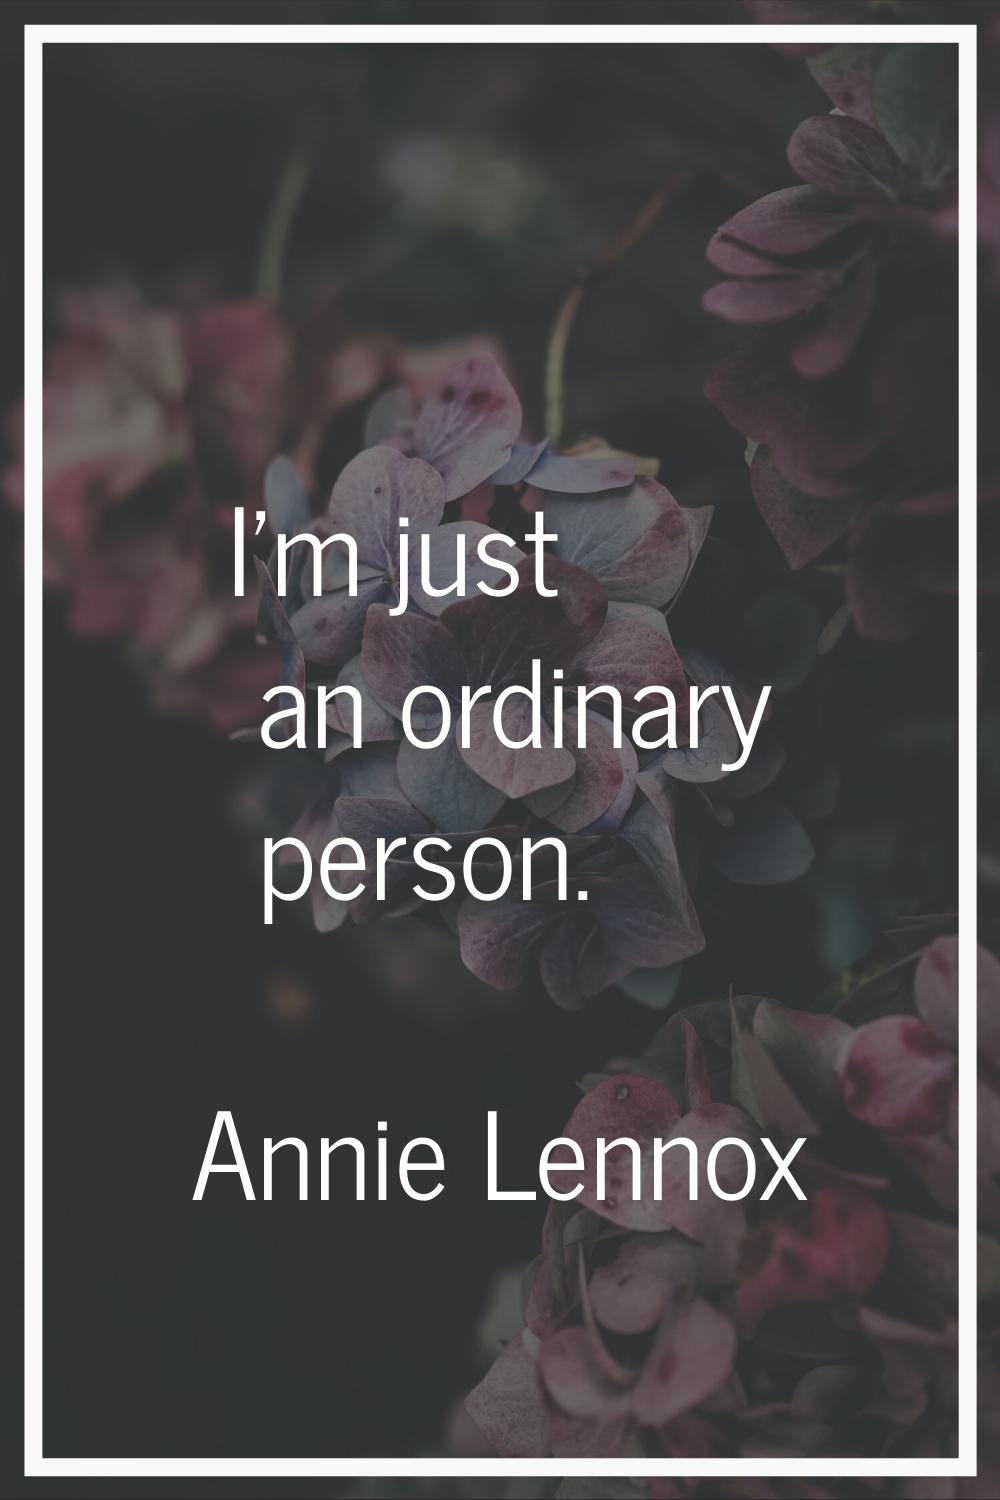 I'm just an ordinary person.